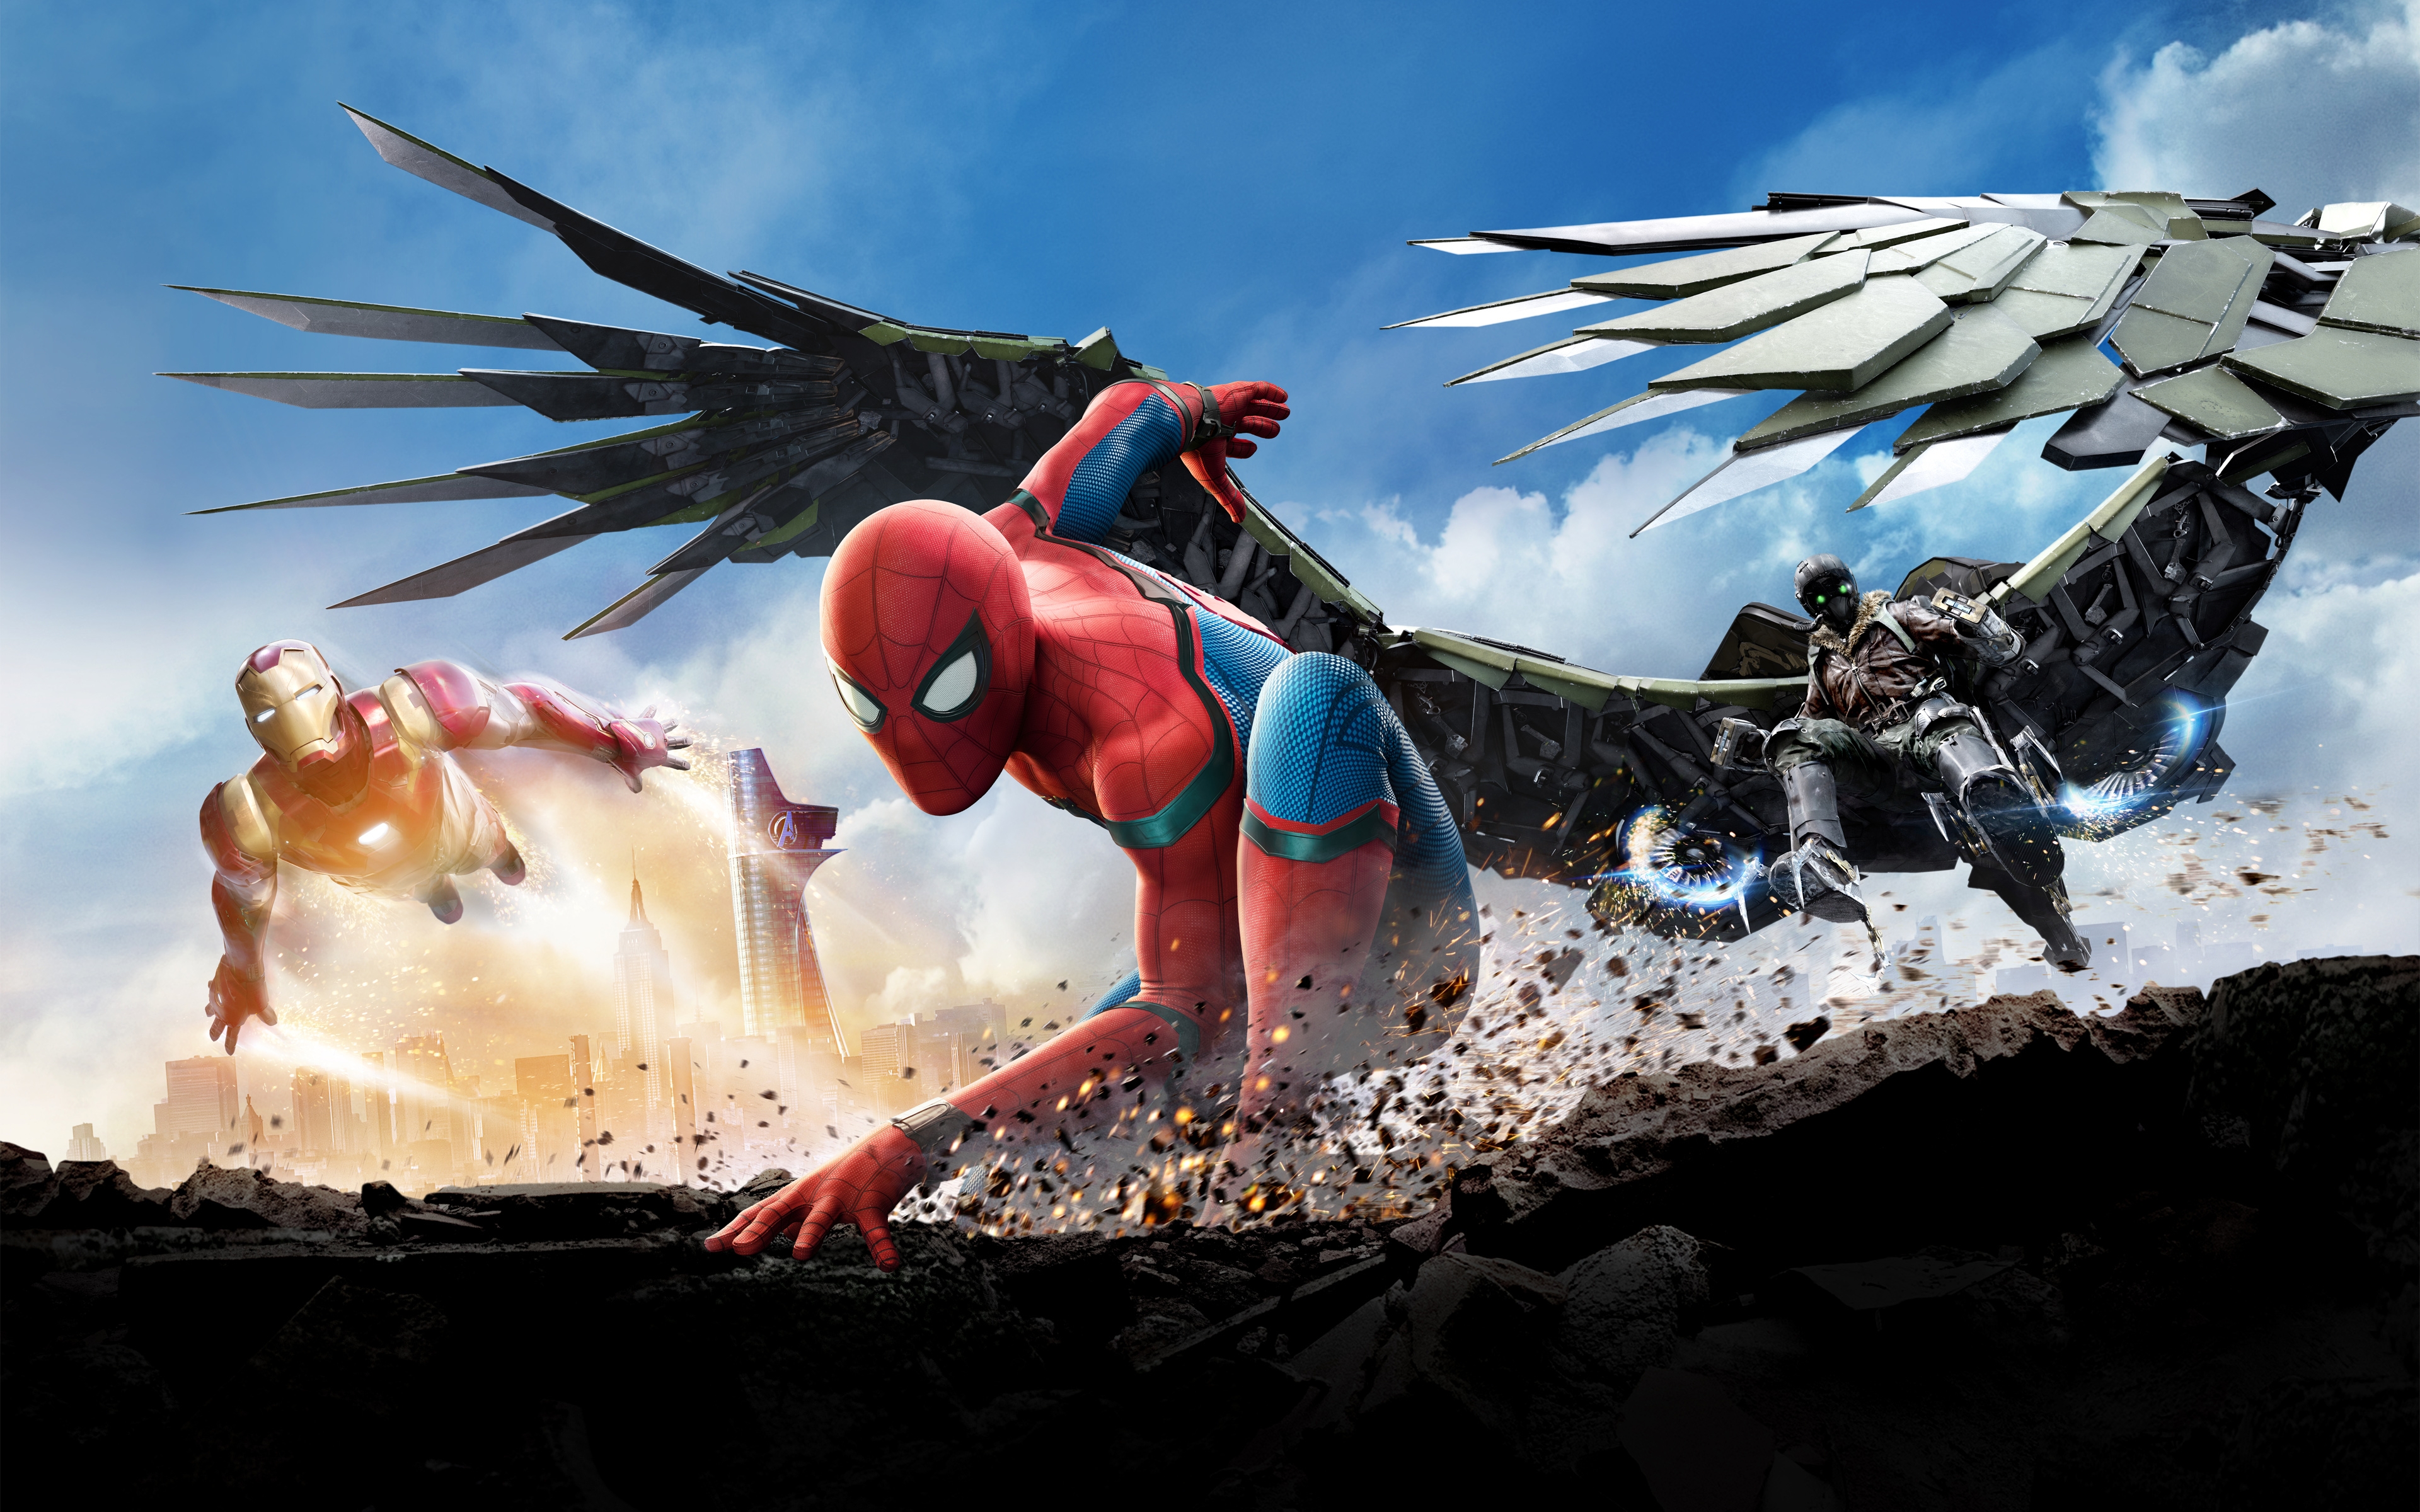 Spiderman Home Coming 2017 for 3840 x 2400 4K Retina Display resolution